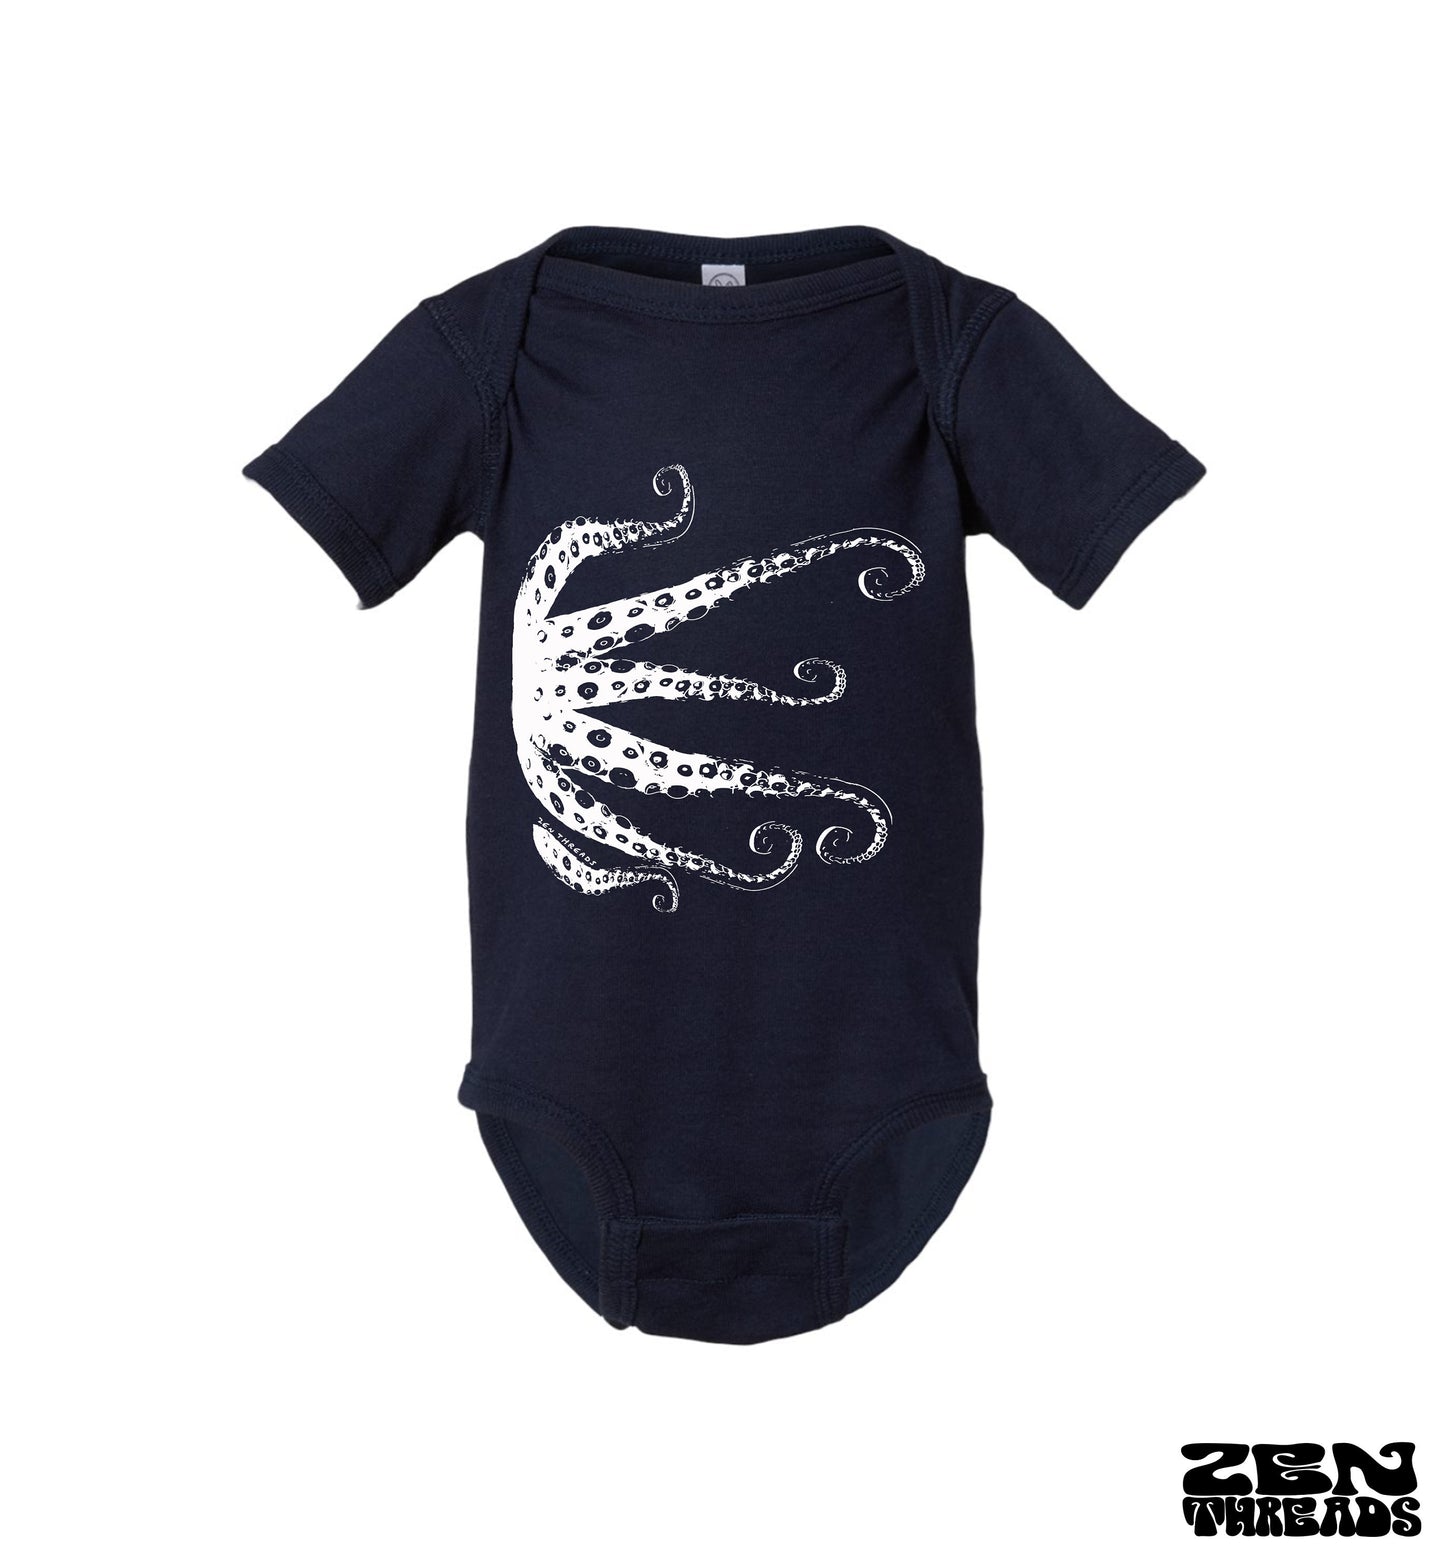 Baby One-Piece OCTOPUS Tentacles Eco screen printed (+ Color Options) - FREE Shipping